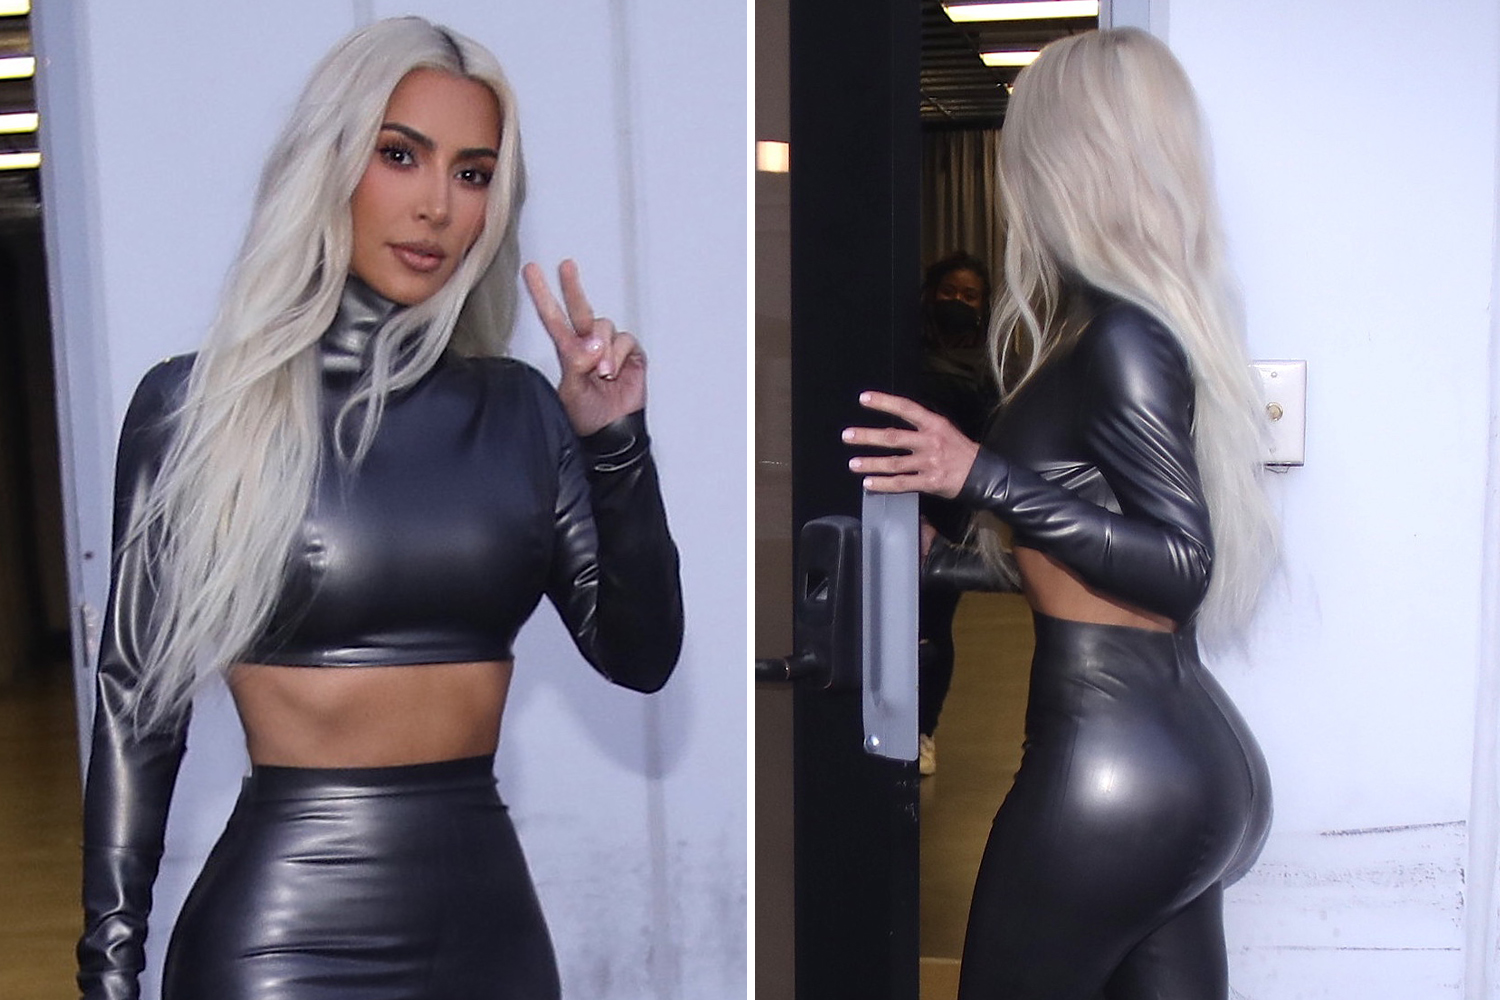 Kim Kardashian flaunts her tiny waist in a skintight outfit in new photos